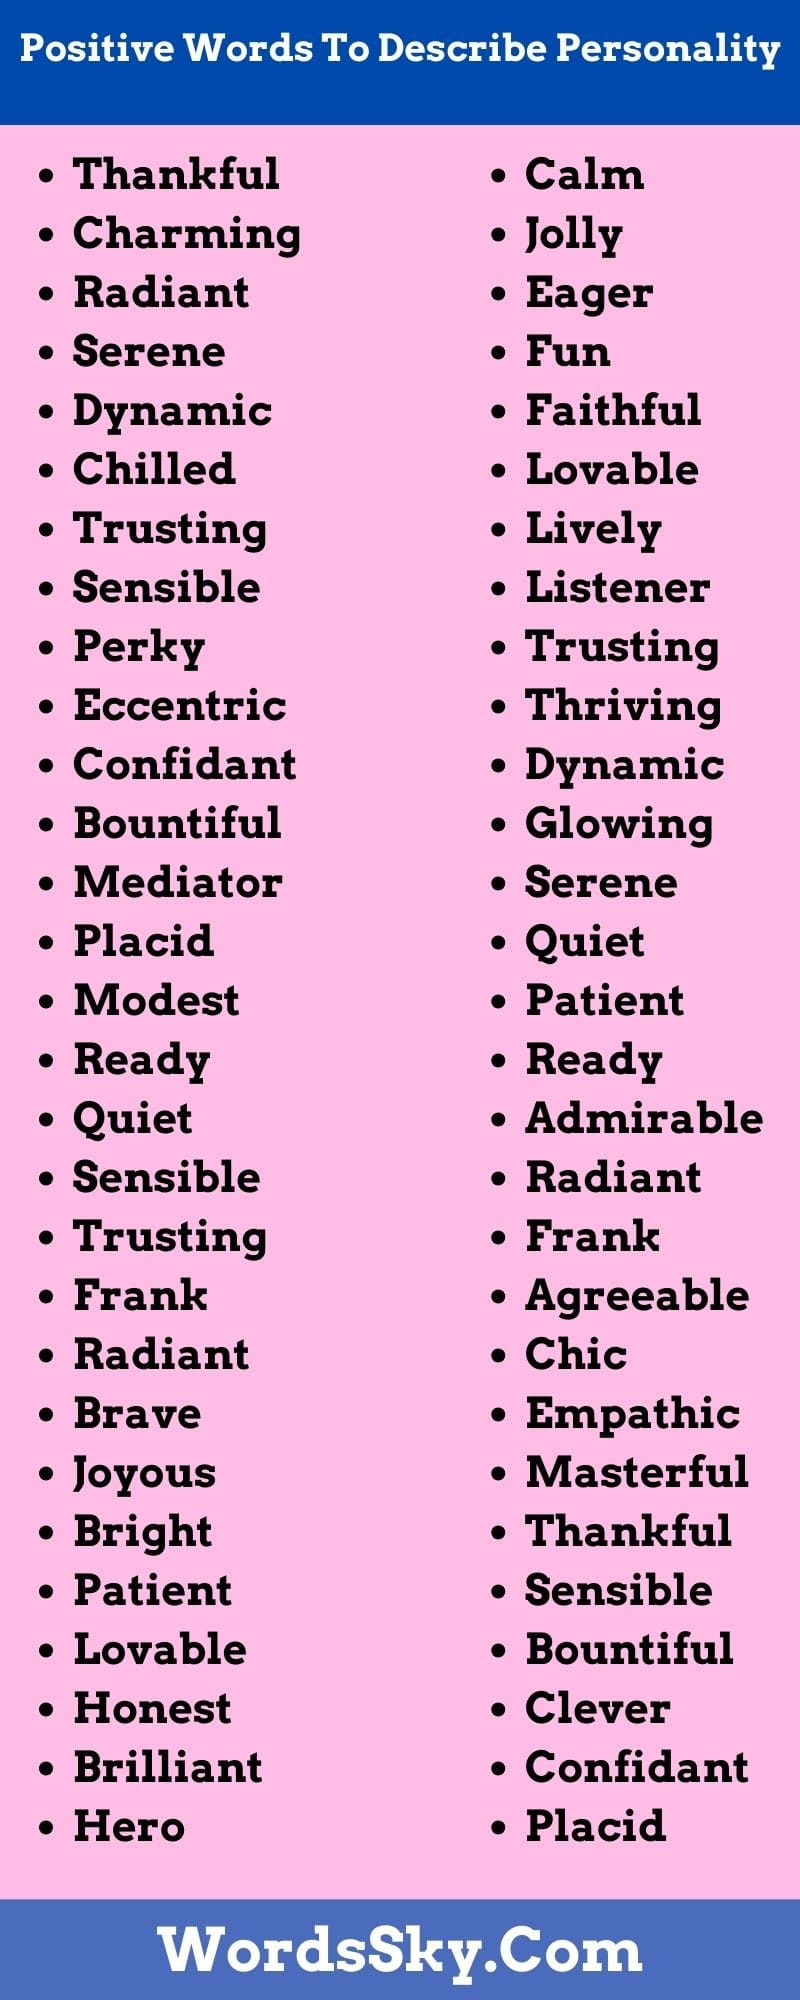 Positive Words To Describe Personality